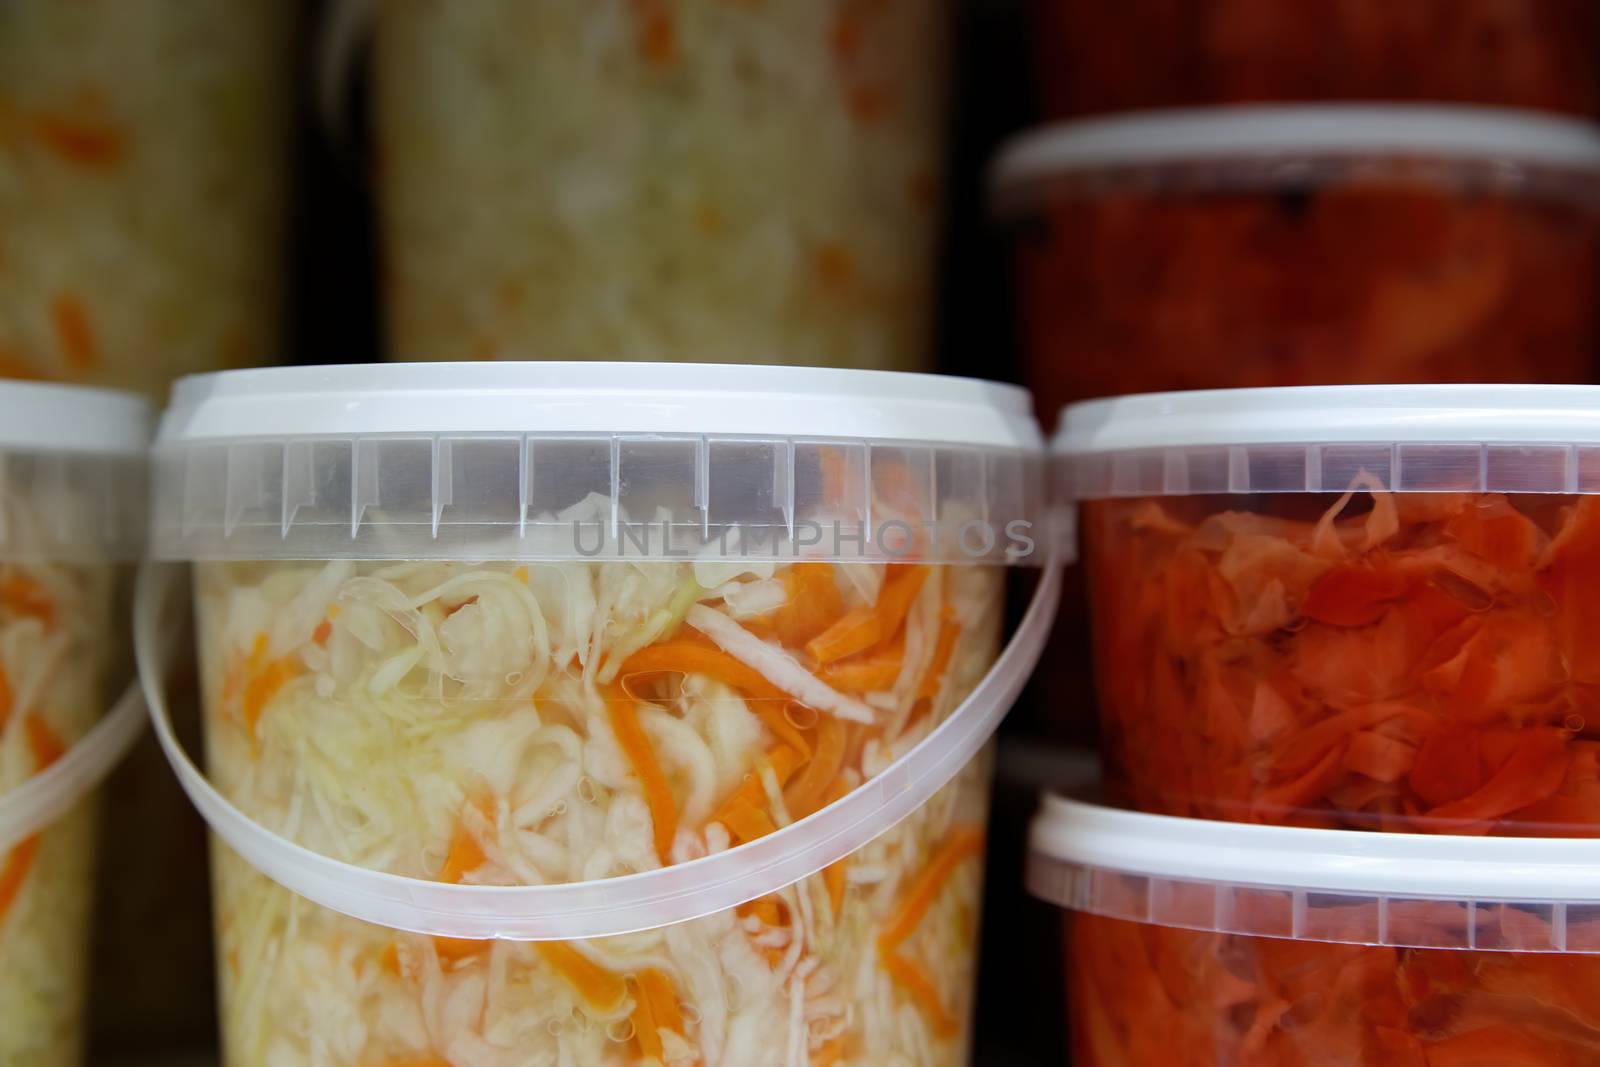 Canned, marinated fermented and pickled vegetables in plastic jars. Sauerkraut, pickles, pickled ginger in the grocery store.